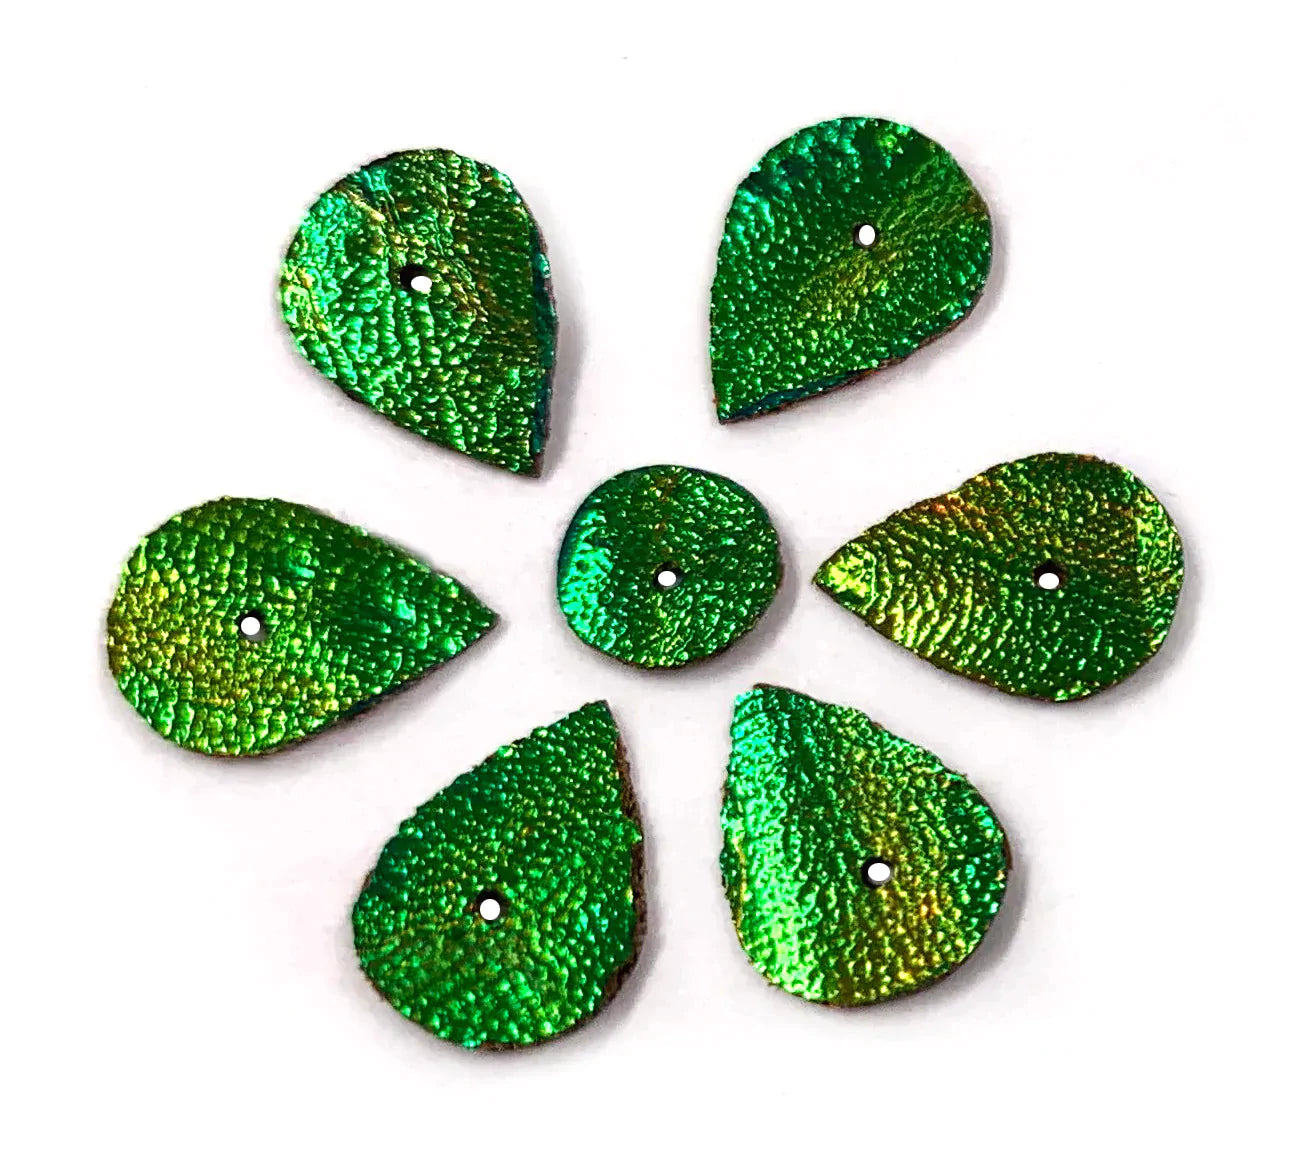 Jewel Beetle Wings UNDRILLED NO-HOLE 100 Pcs Natural Wings - Circle 5 MM